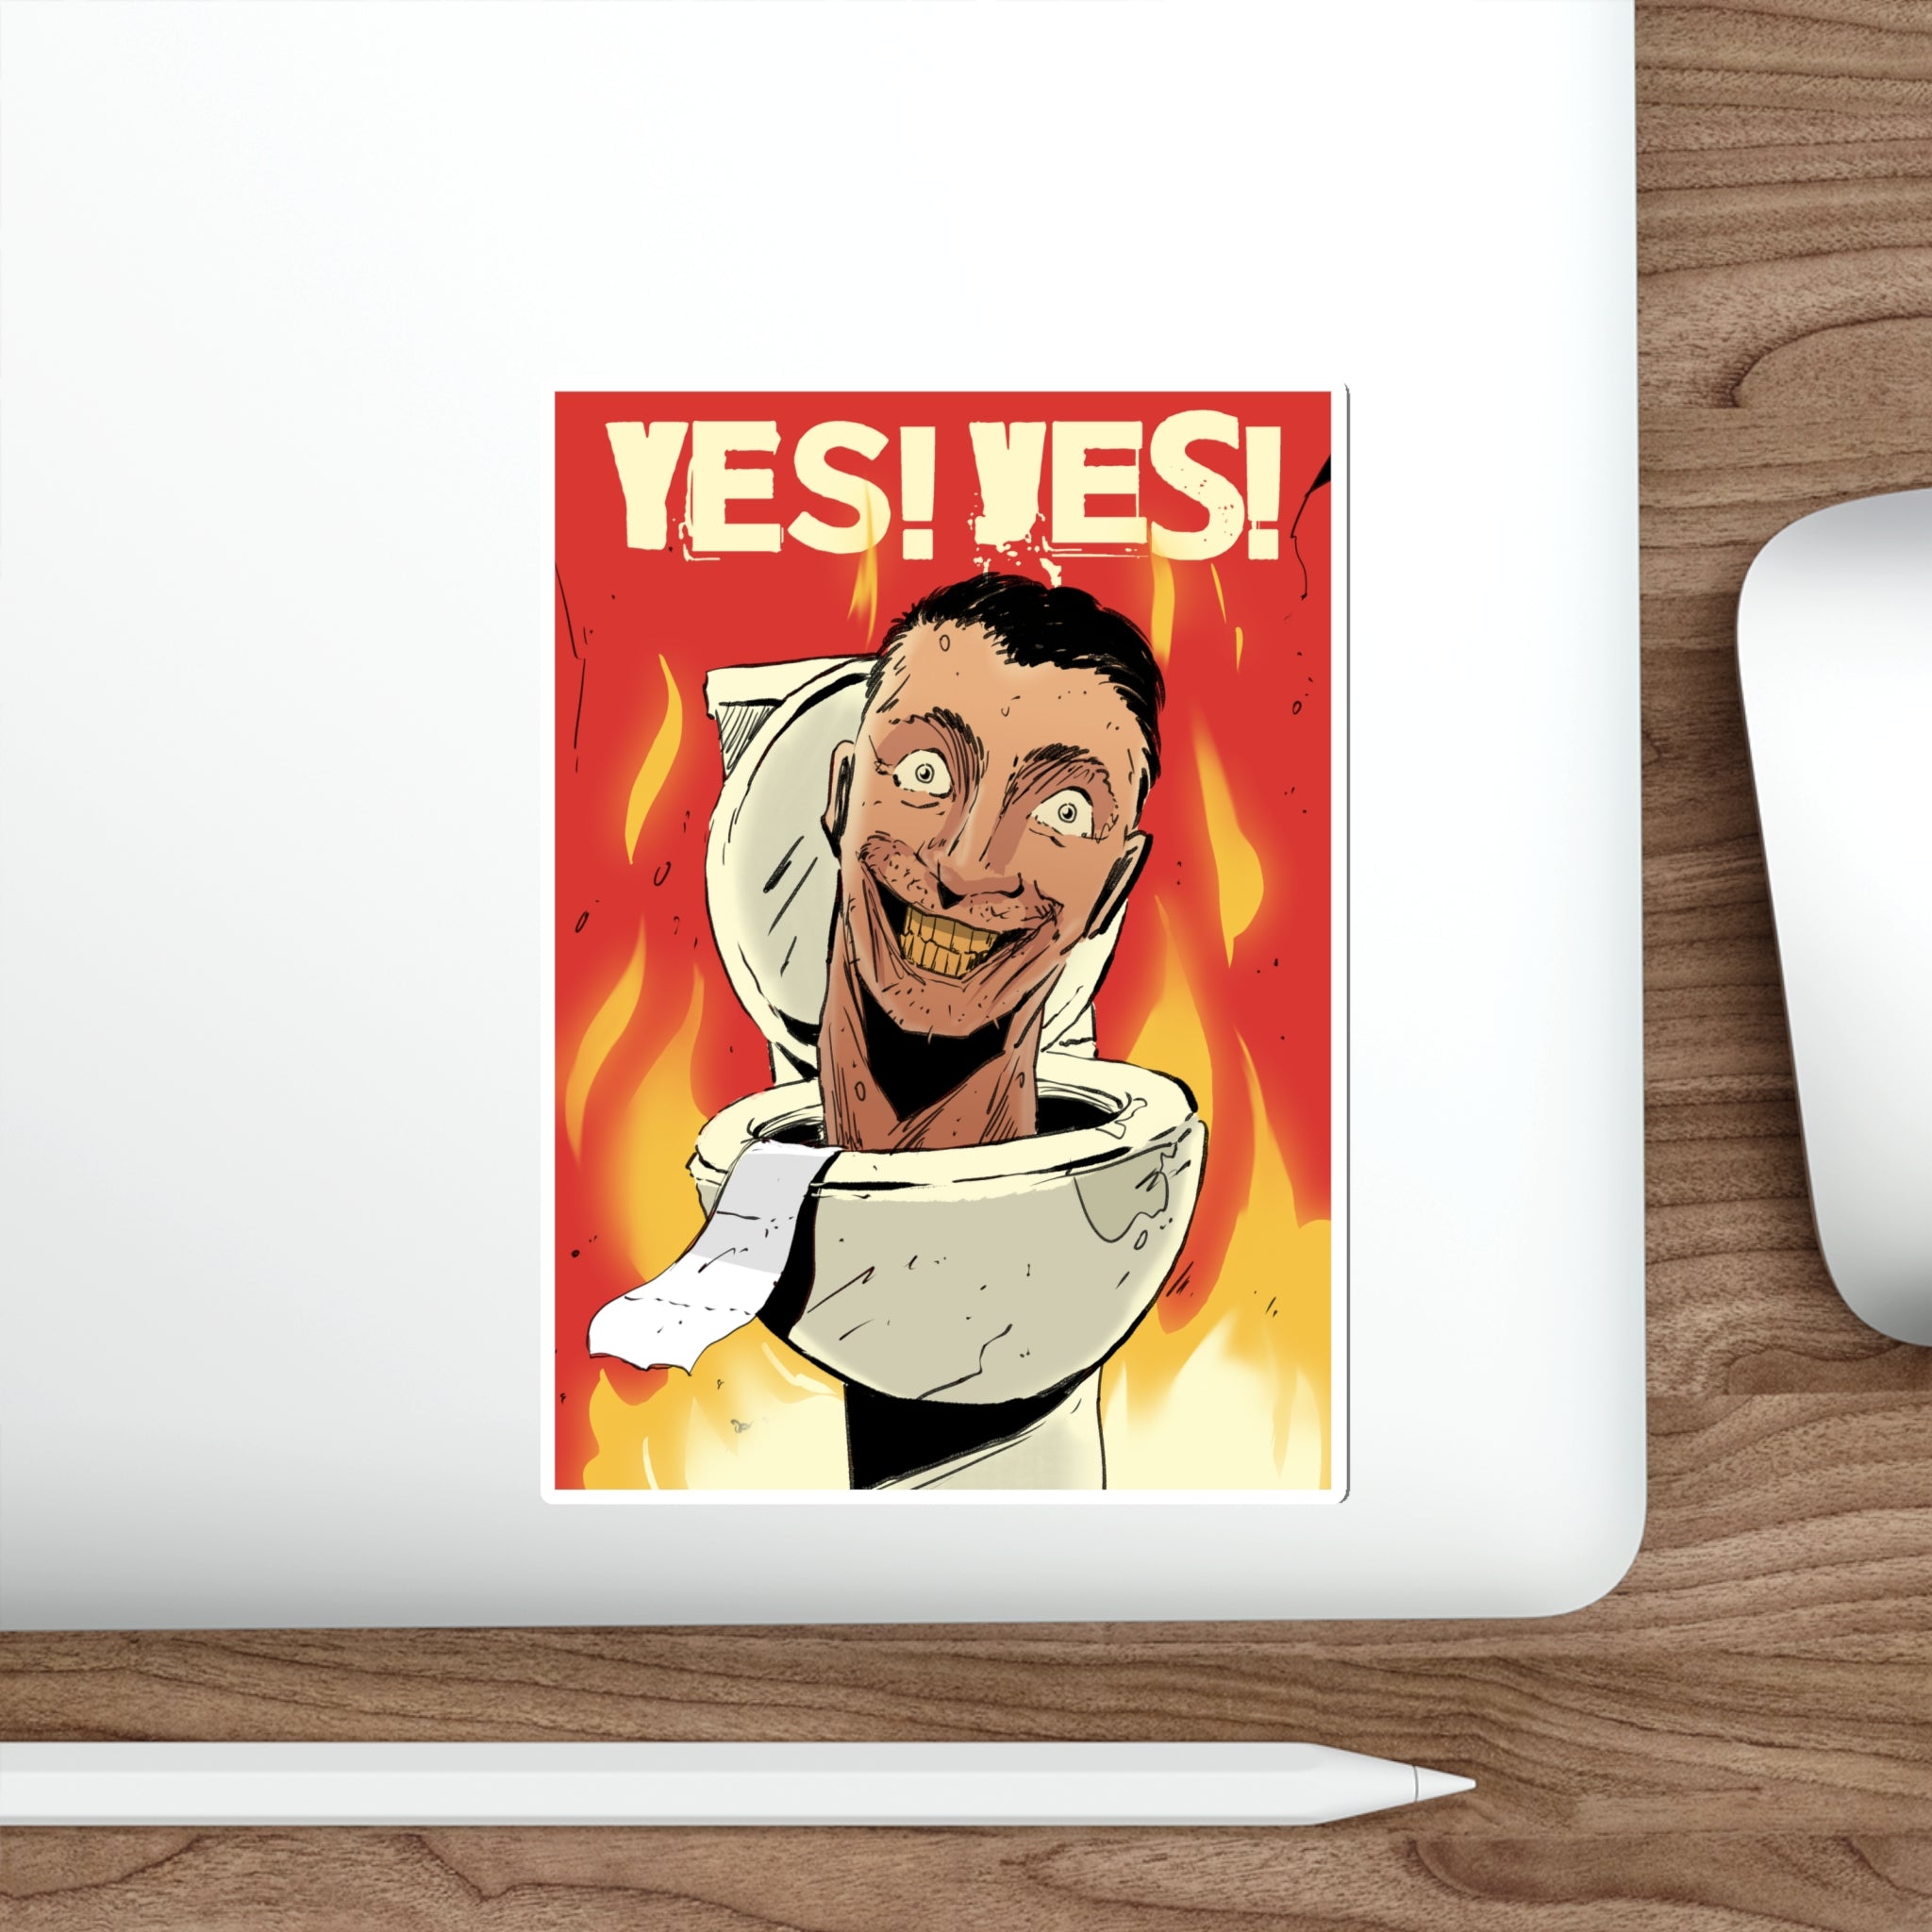 Yes! Yes! Sticker Skibidi toilet surrounded by flames on a sticker on laptop with wooden desk mouse and apple pen